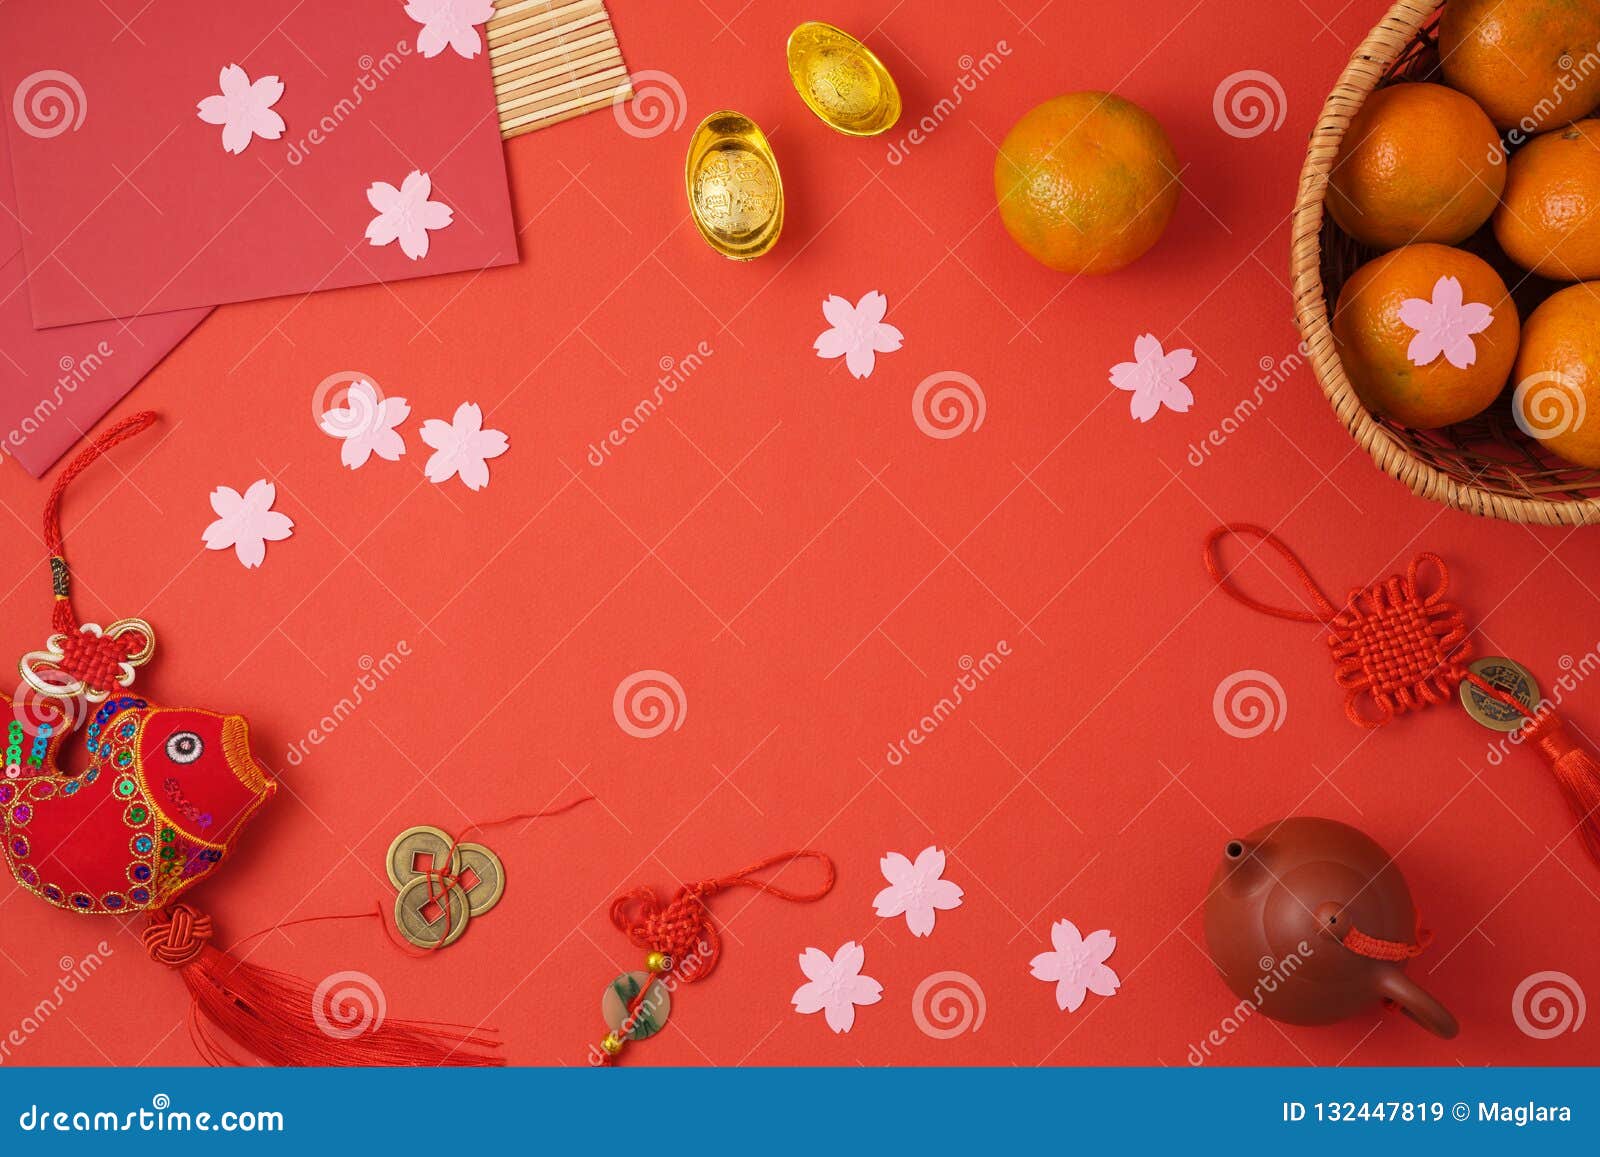 Chinese New Year Background with Traditional Decorations for Spring  Festival on Red Table Stock Image - Image of good, tabletop: 132447819